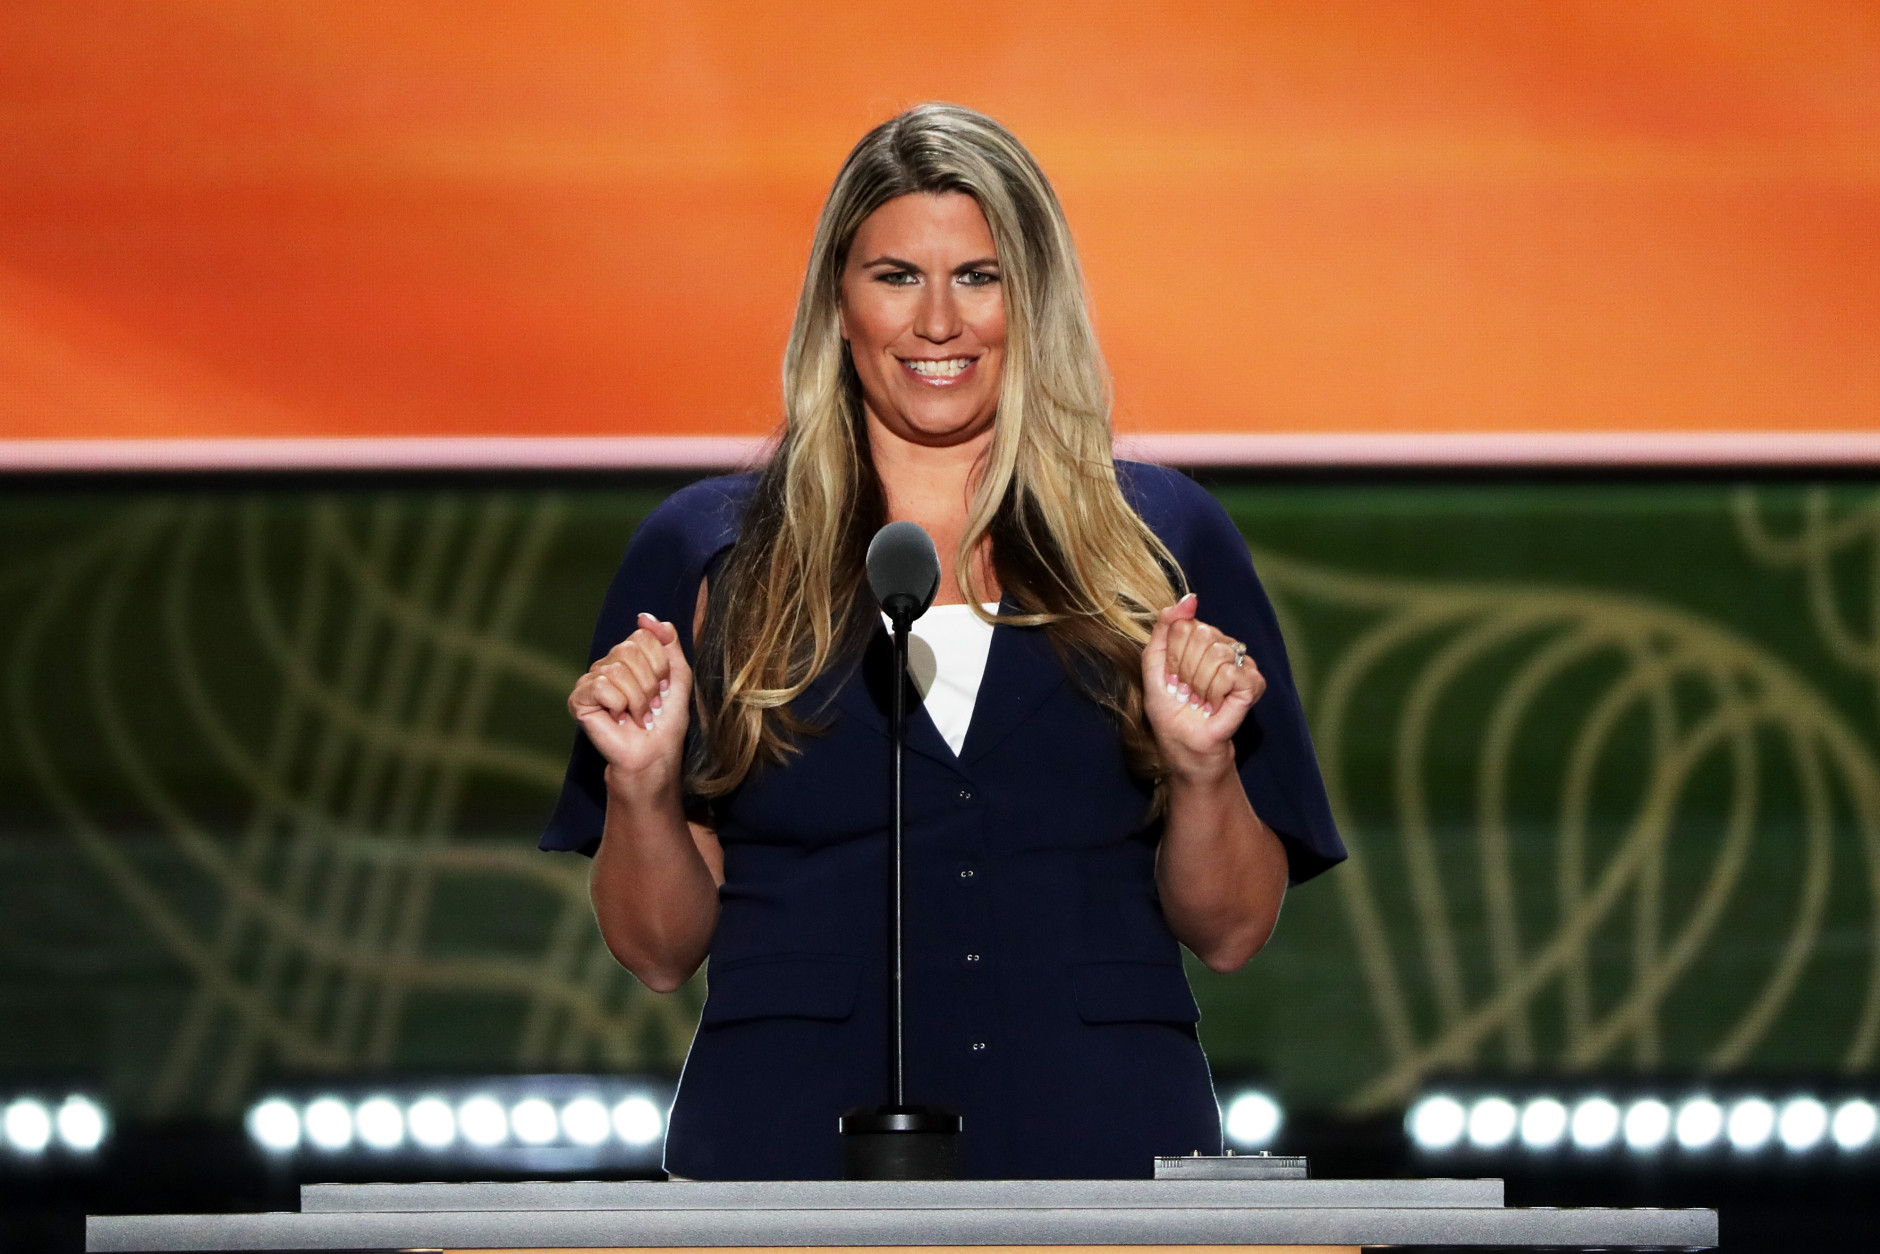 CLEVELAND, OH - JULY 20:  Michelle Van Etten delivers a speech on the third day of the Republican National Convention on July 20, 2016 at the Quicken Loans Arena in Cleveland, Ohio. Republican presidential candidate Donald Trump received the number of votes needed to secure the party's nomination. An estimated 50,000 people are expected in Cleveland, including hundreds of protesters and members of the media. The four-day Republican National Convention kicked off on July 18.  (Photo by Alex Wong/Getty Images)